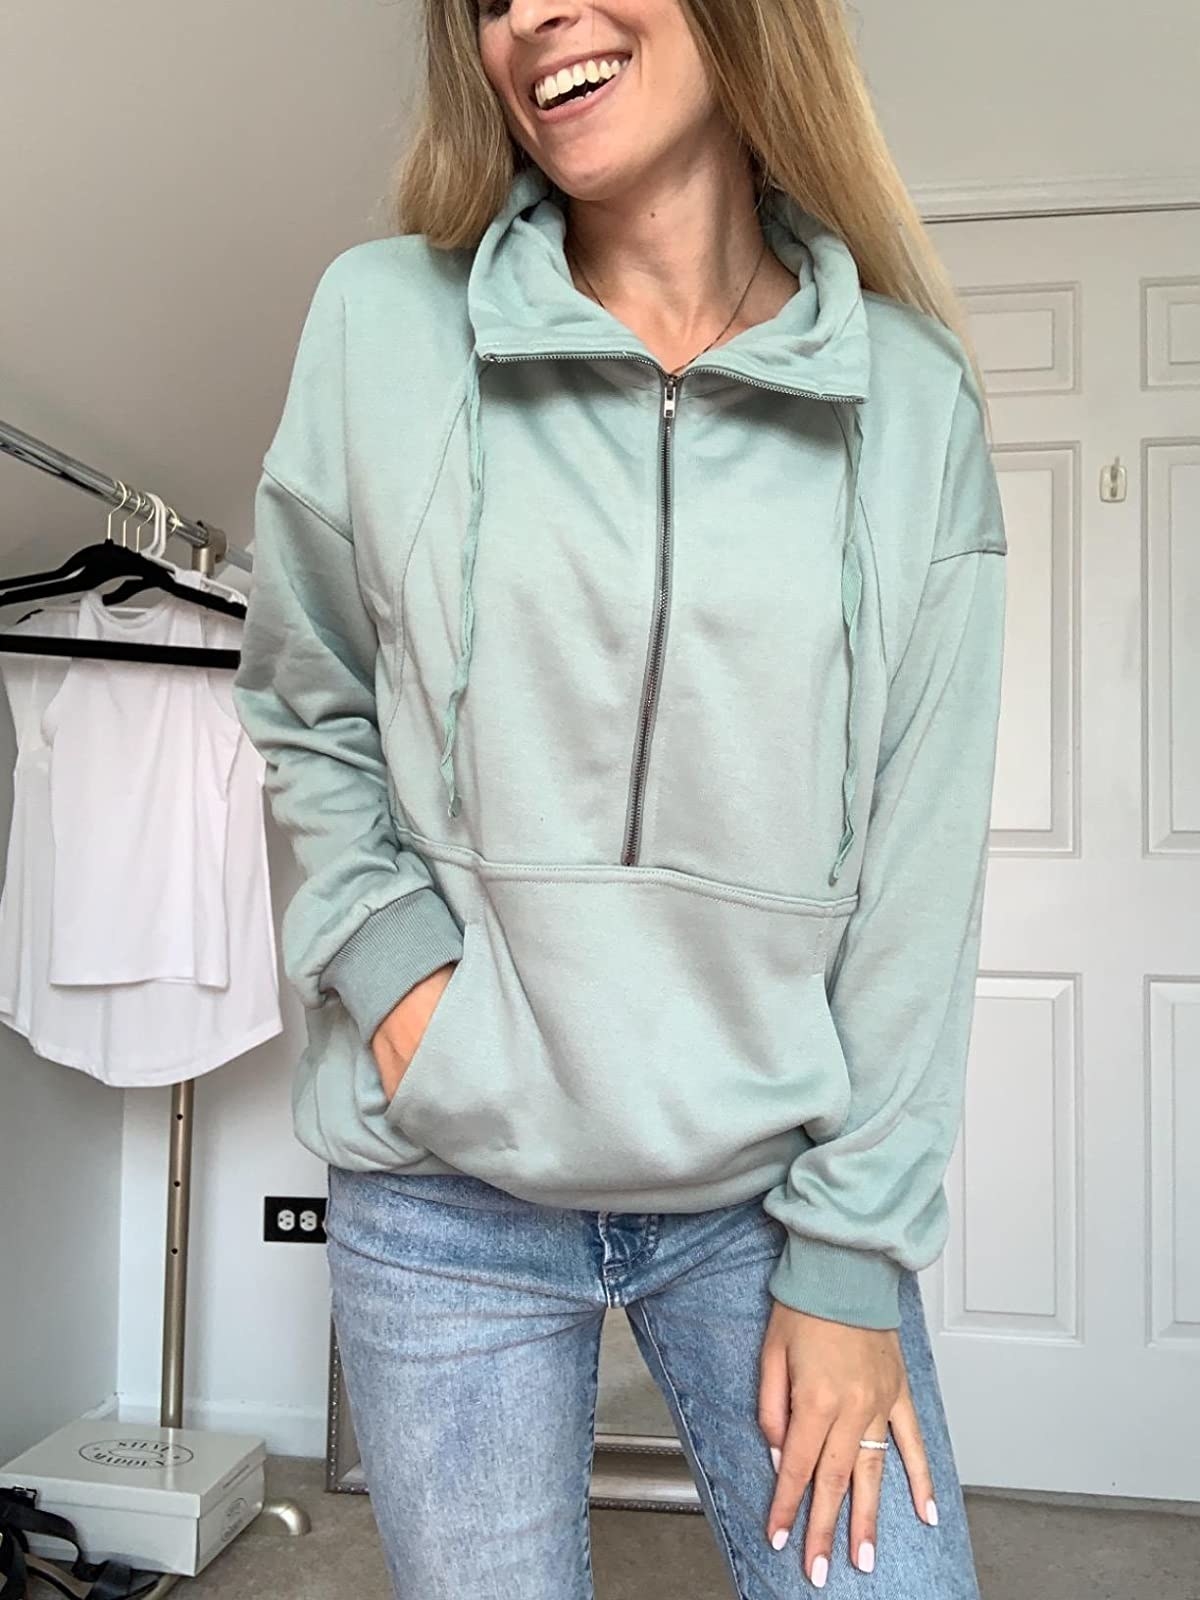 Reviewer wearing light blue sweatshirt and jeans